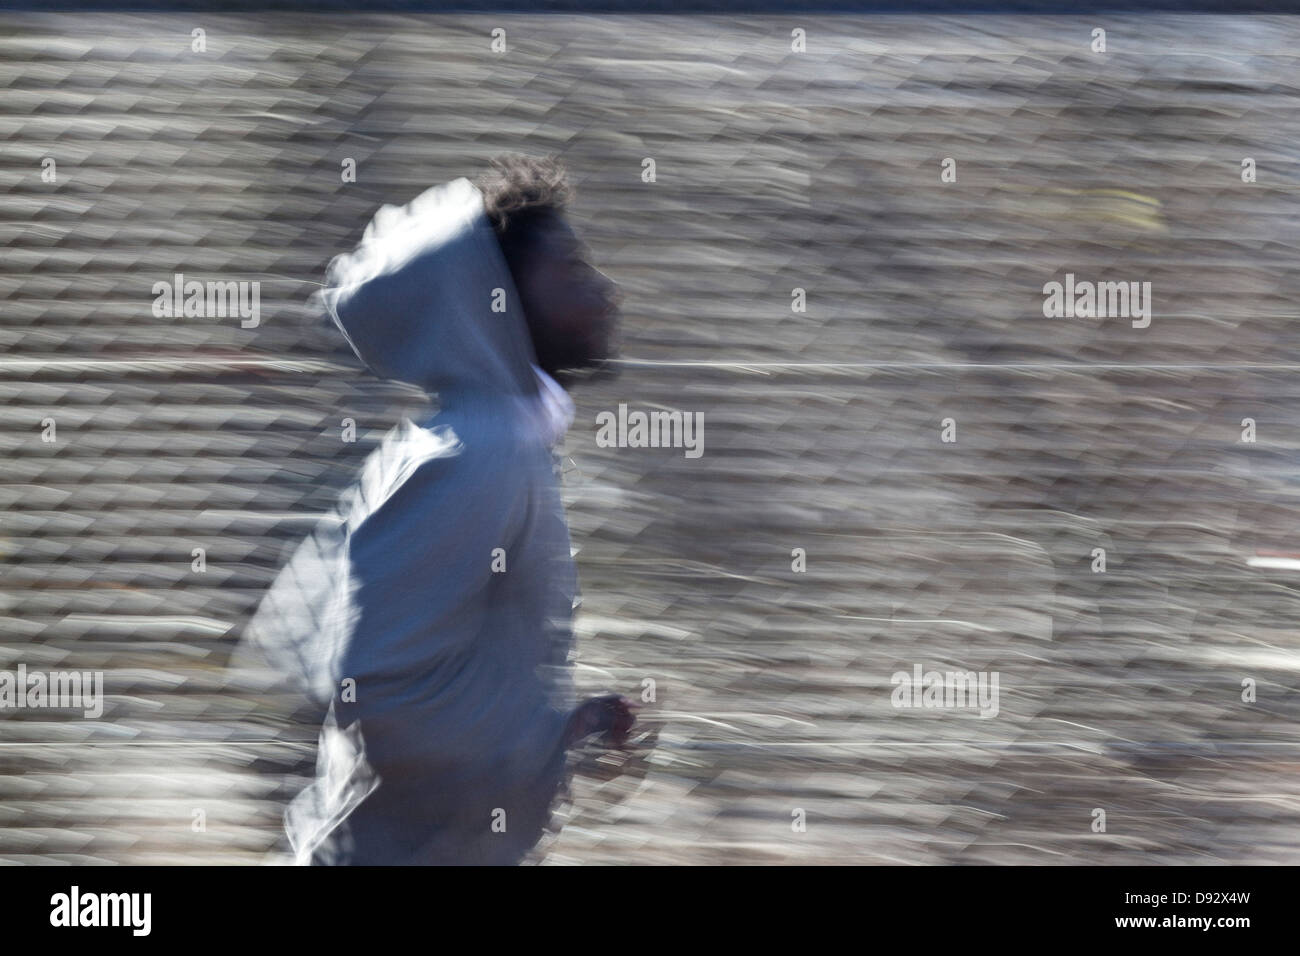 A young man jogging in front of a chain link fence Stock Photo